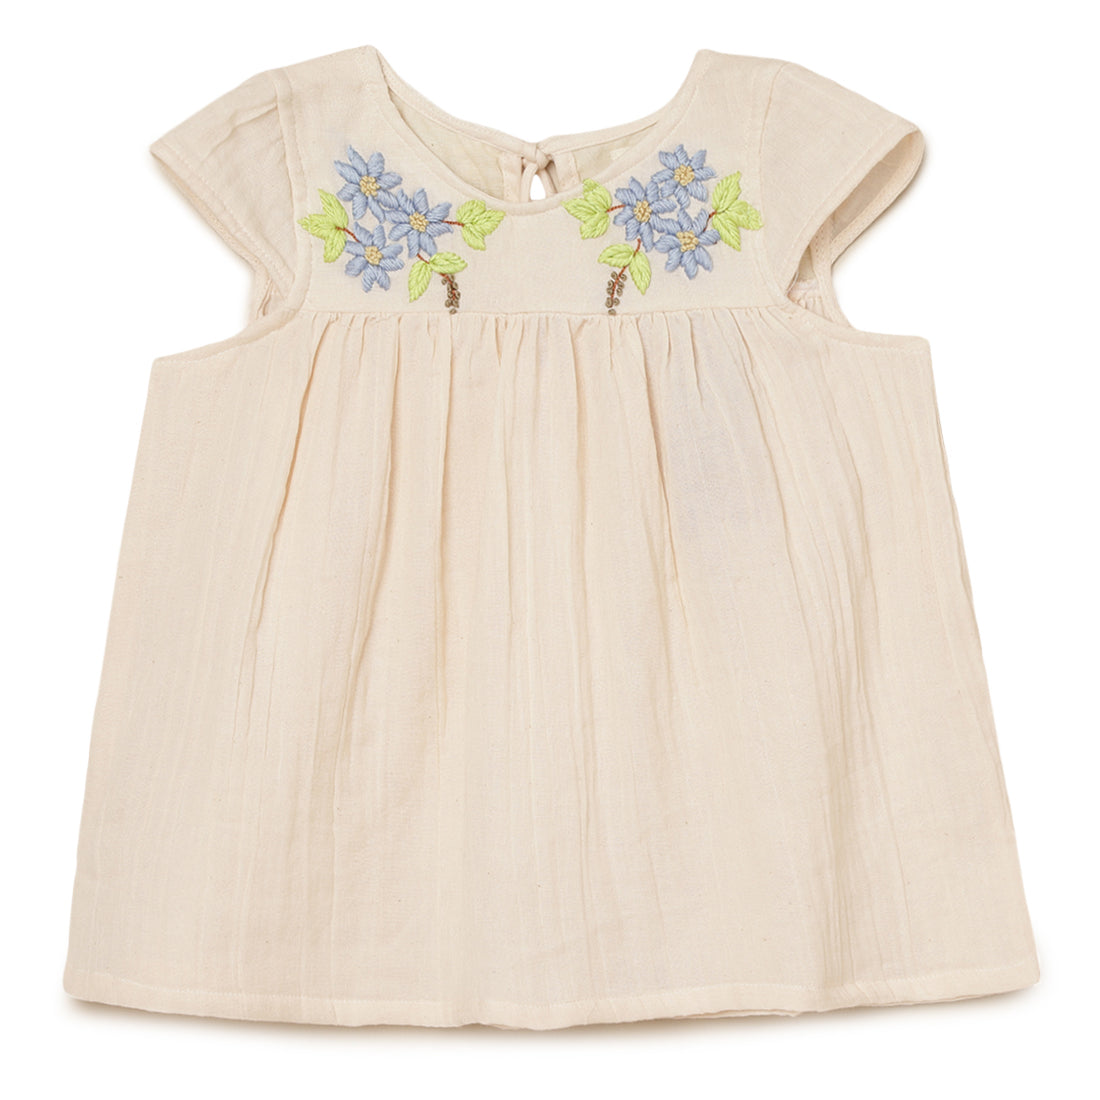 Girls Embroidered Top 2 yrs to 6 yrs - Front